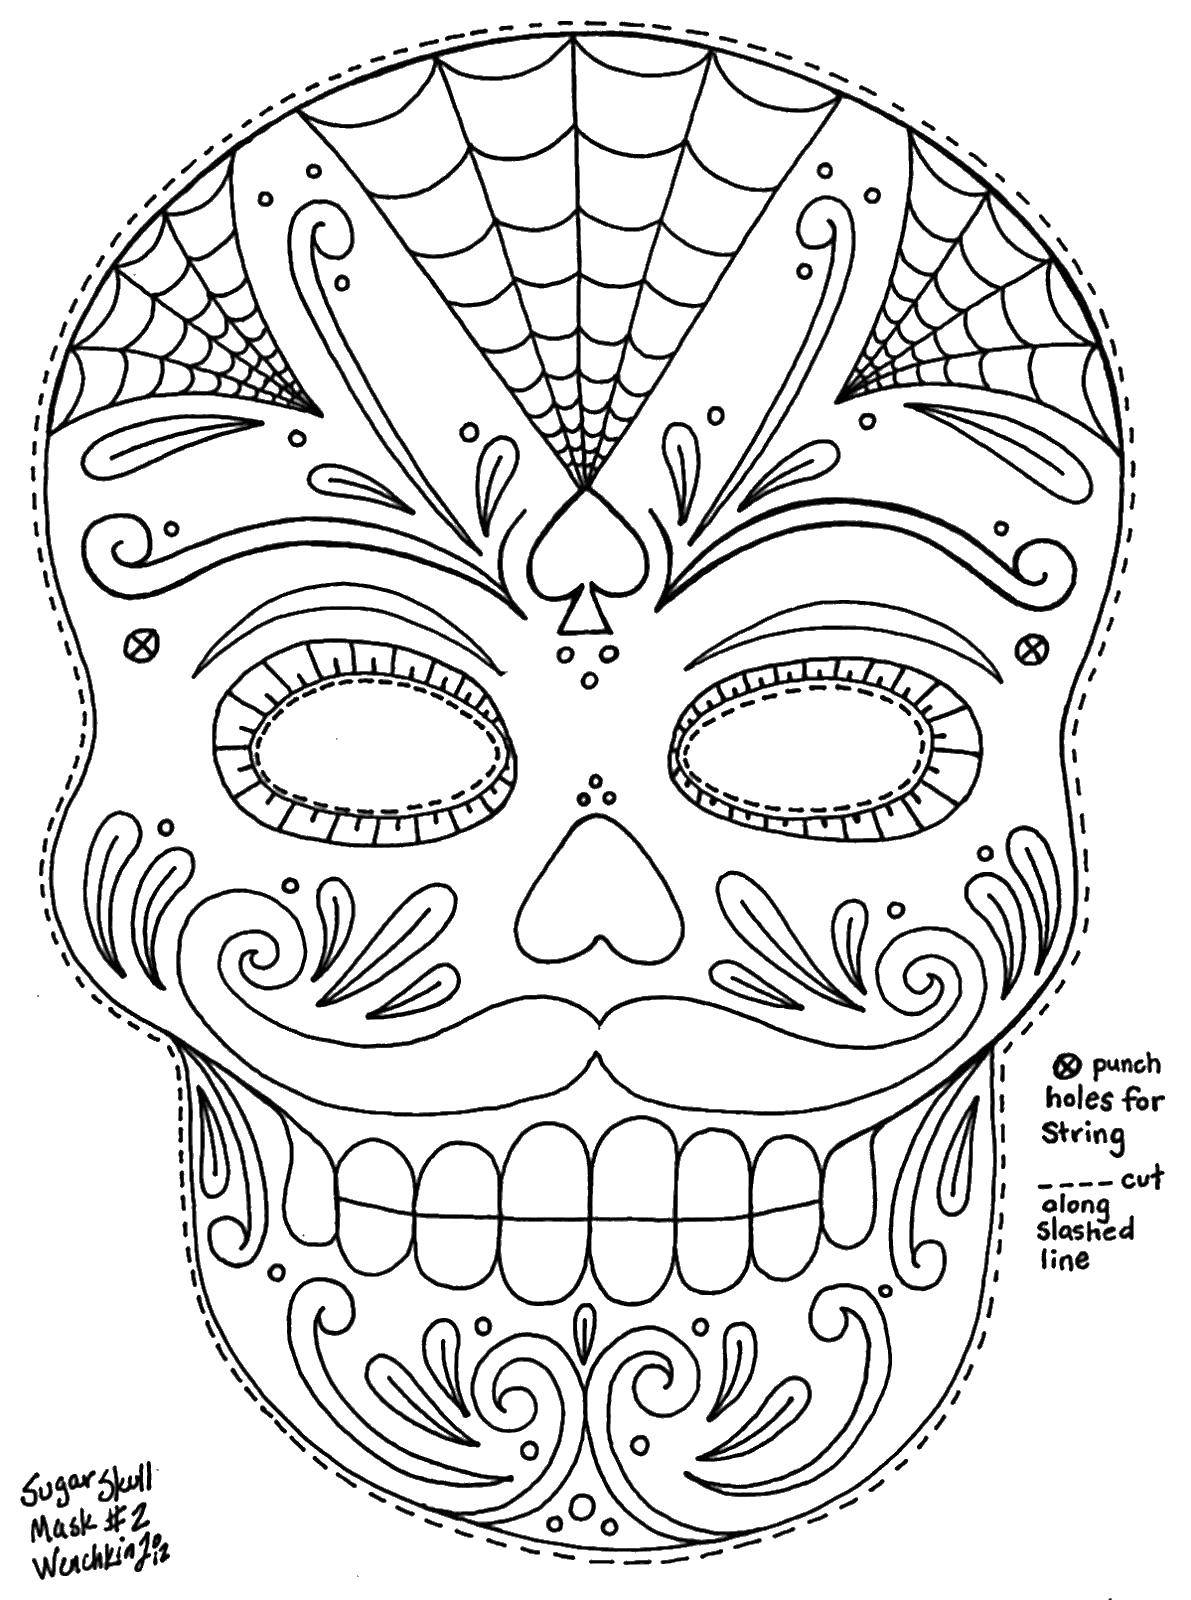 Coloring Web and patterns. Category Skull. Tags:  Skull, patterns.